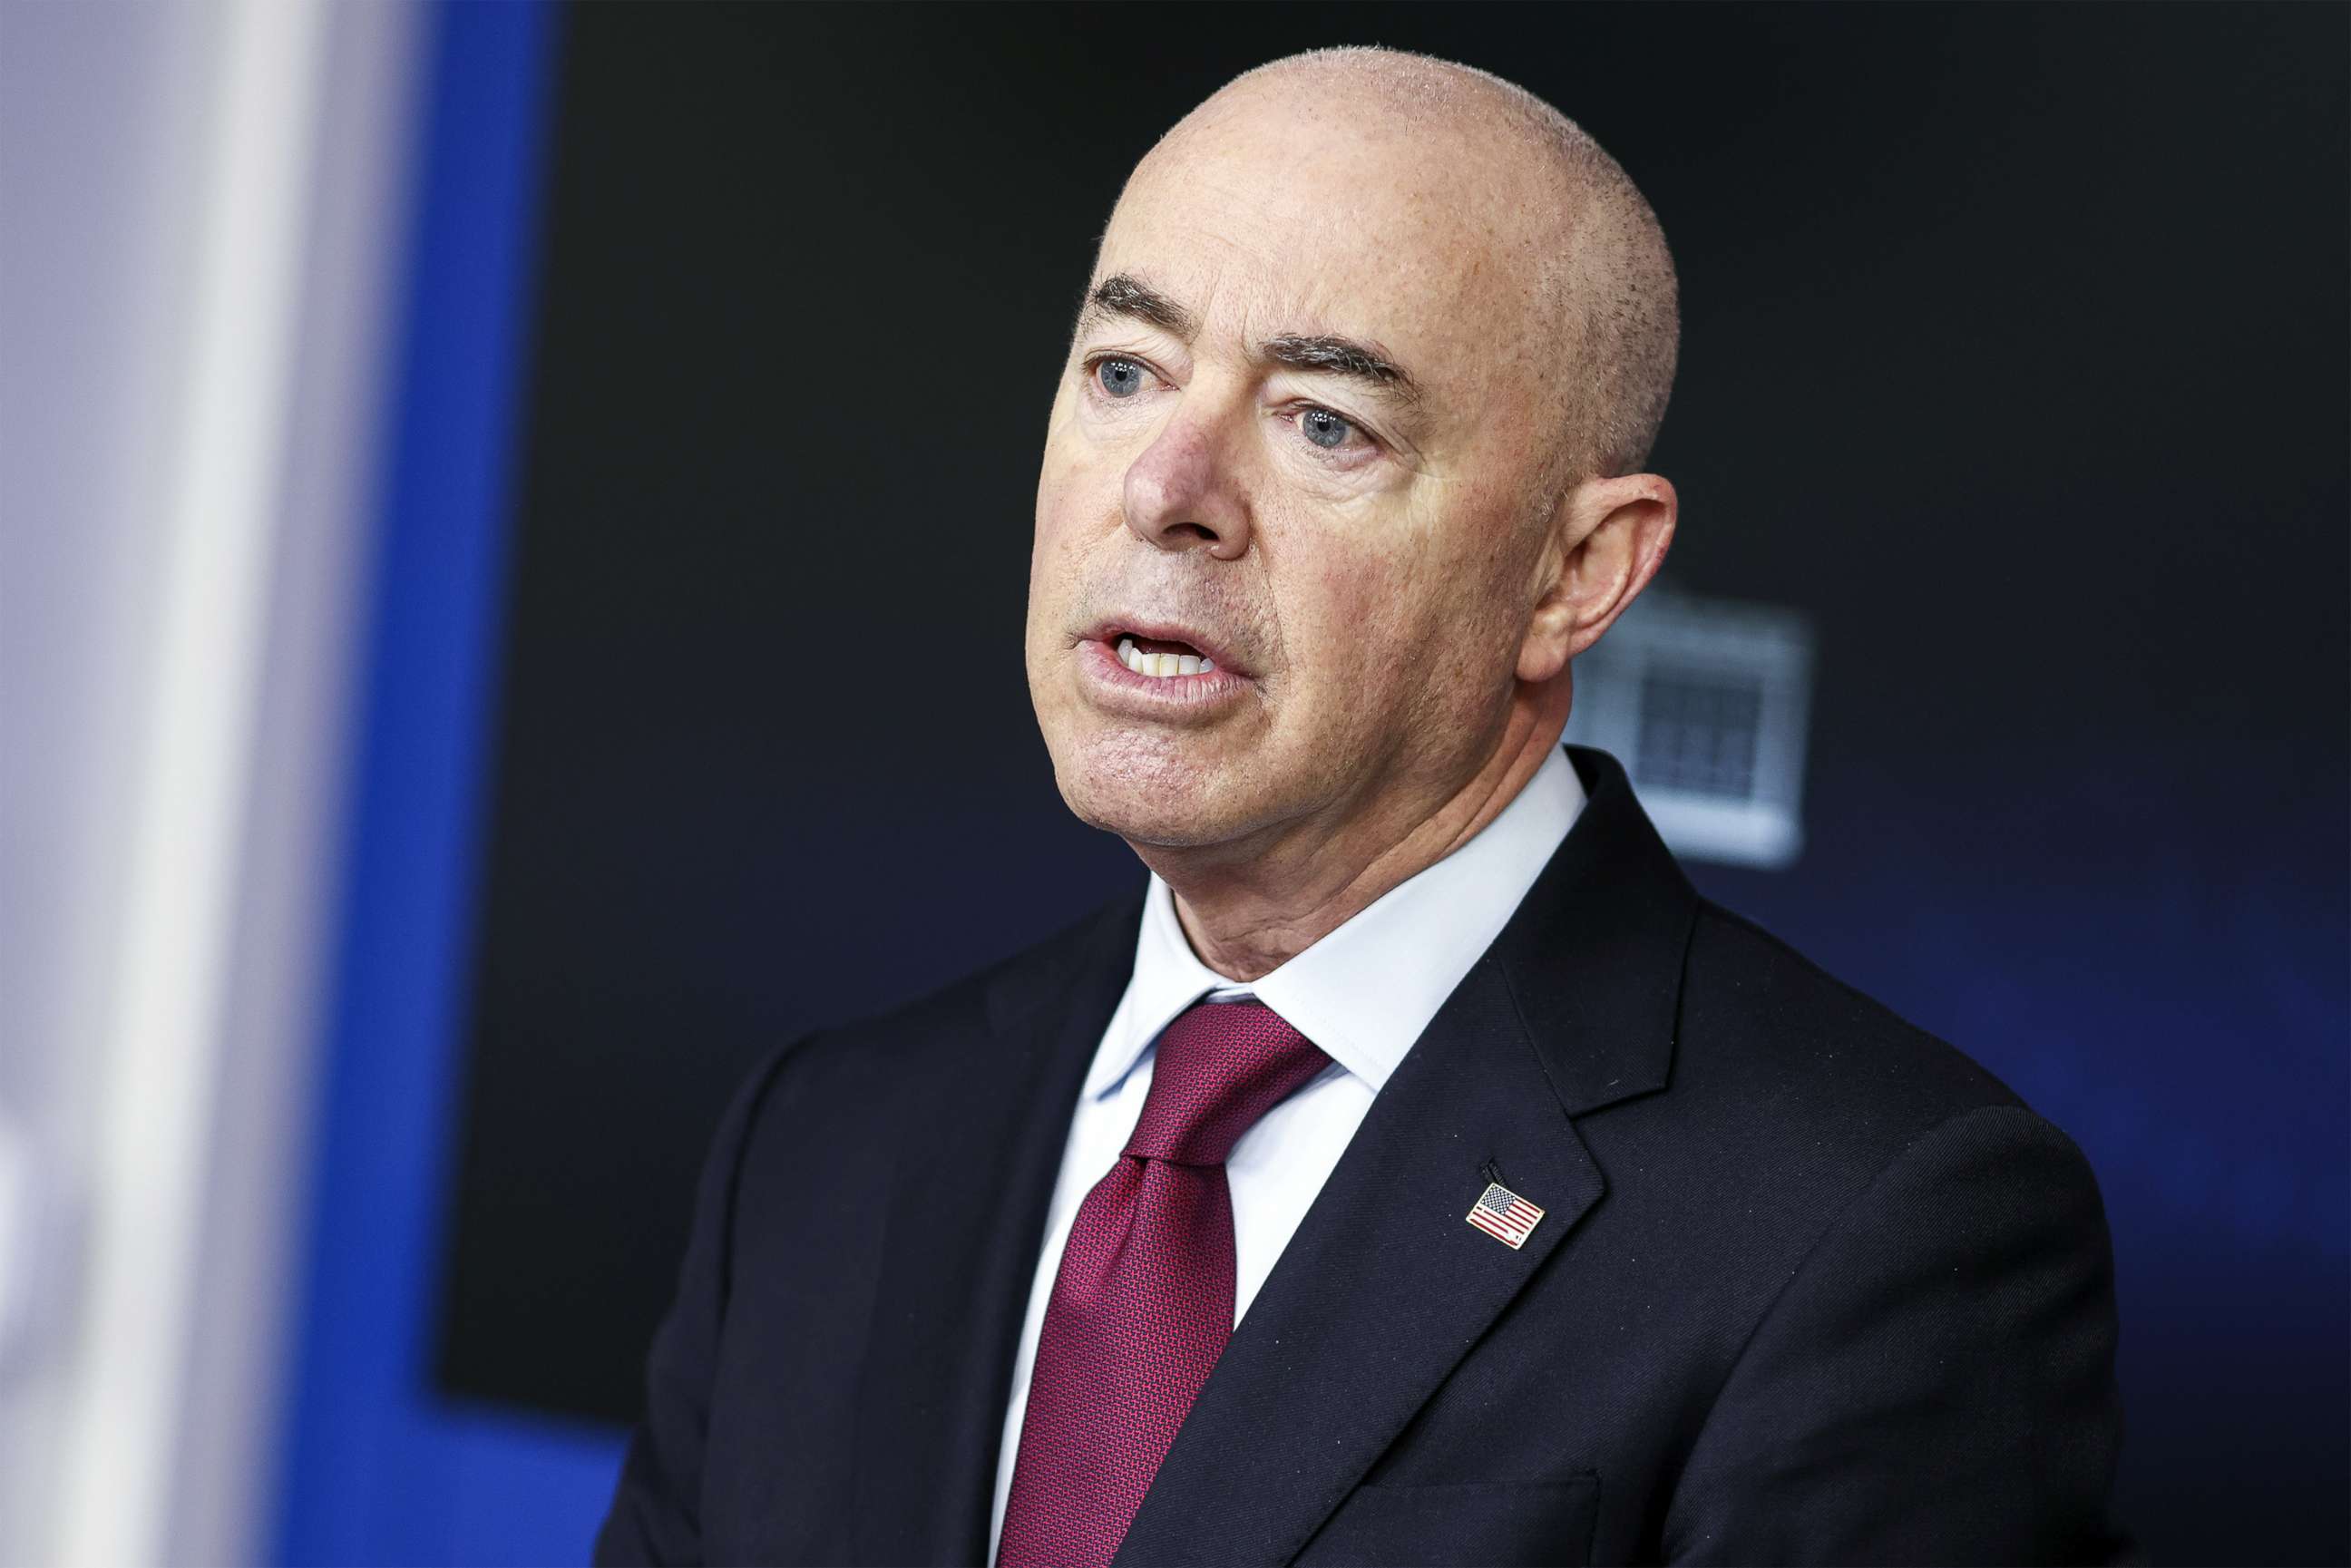 PHOTO: Alejandro Mayorkas, secretary of the Department of Homeland Security, speaks during a news conference in White House in Washington, March 1, 2021.